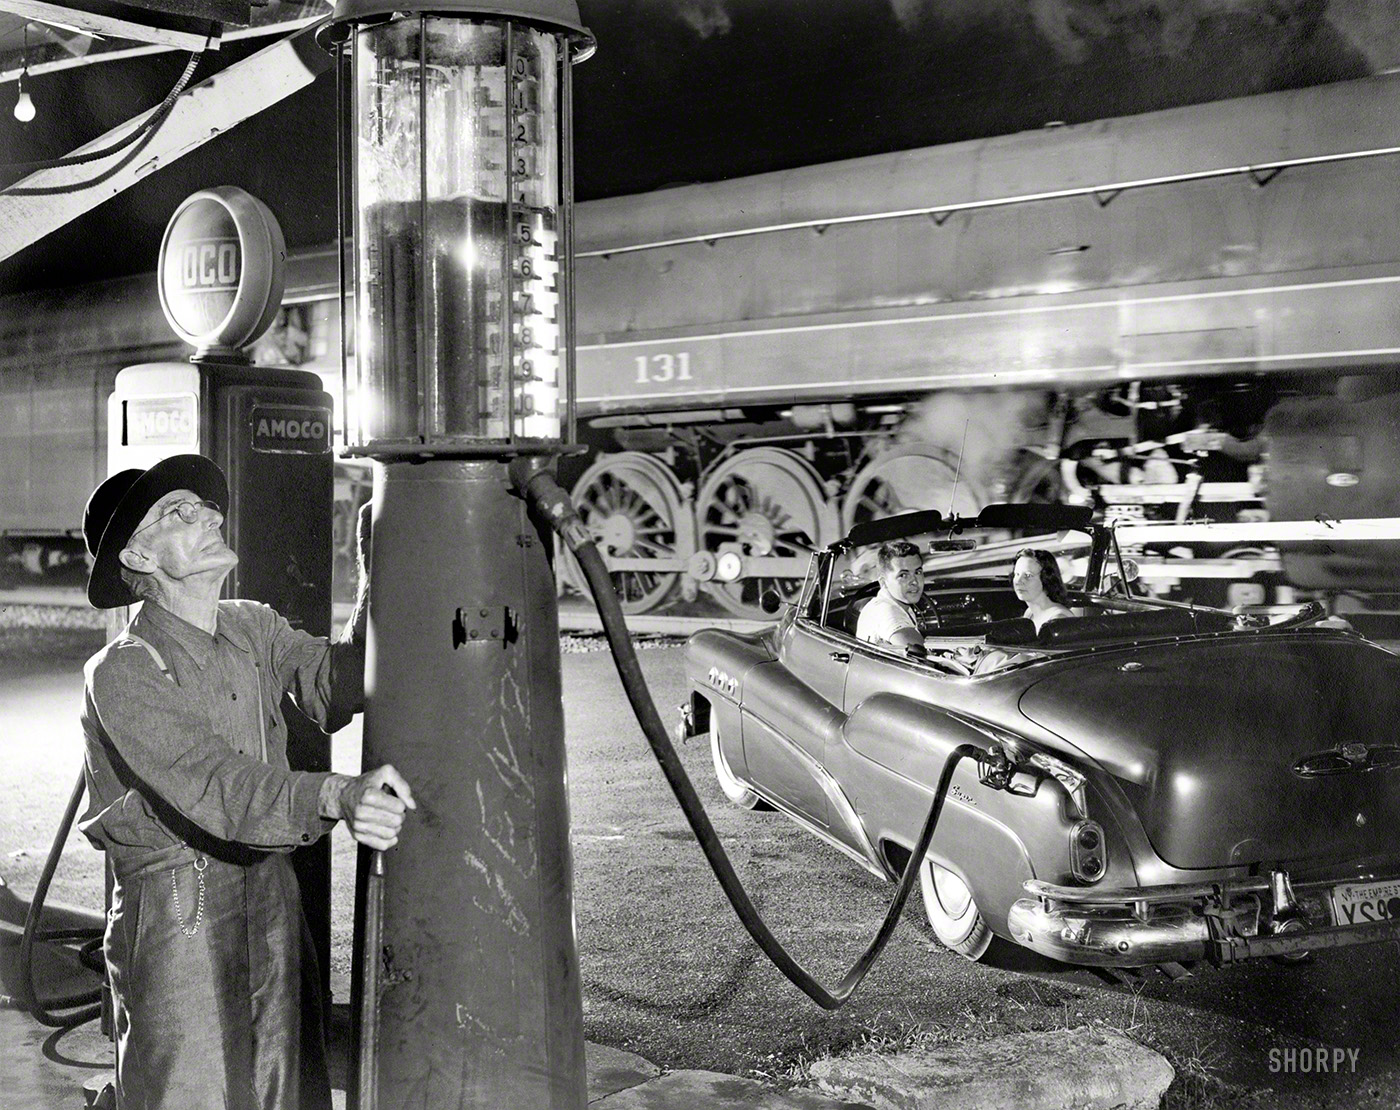 Vesuvius, Virginia, 1956. "Sometimes the electricity fails." Gelatin silver print by Ogle Winston Link, pioneer of the photographic genre that might be called rail noir. Library of Congress Prints & Photographs Division. View full size.